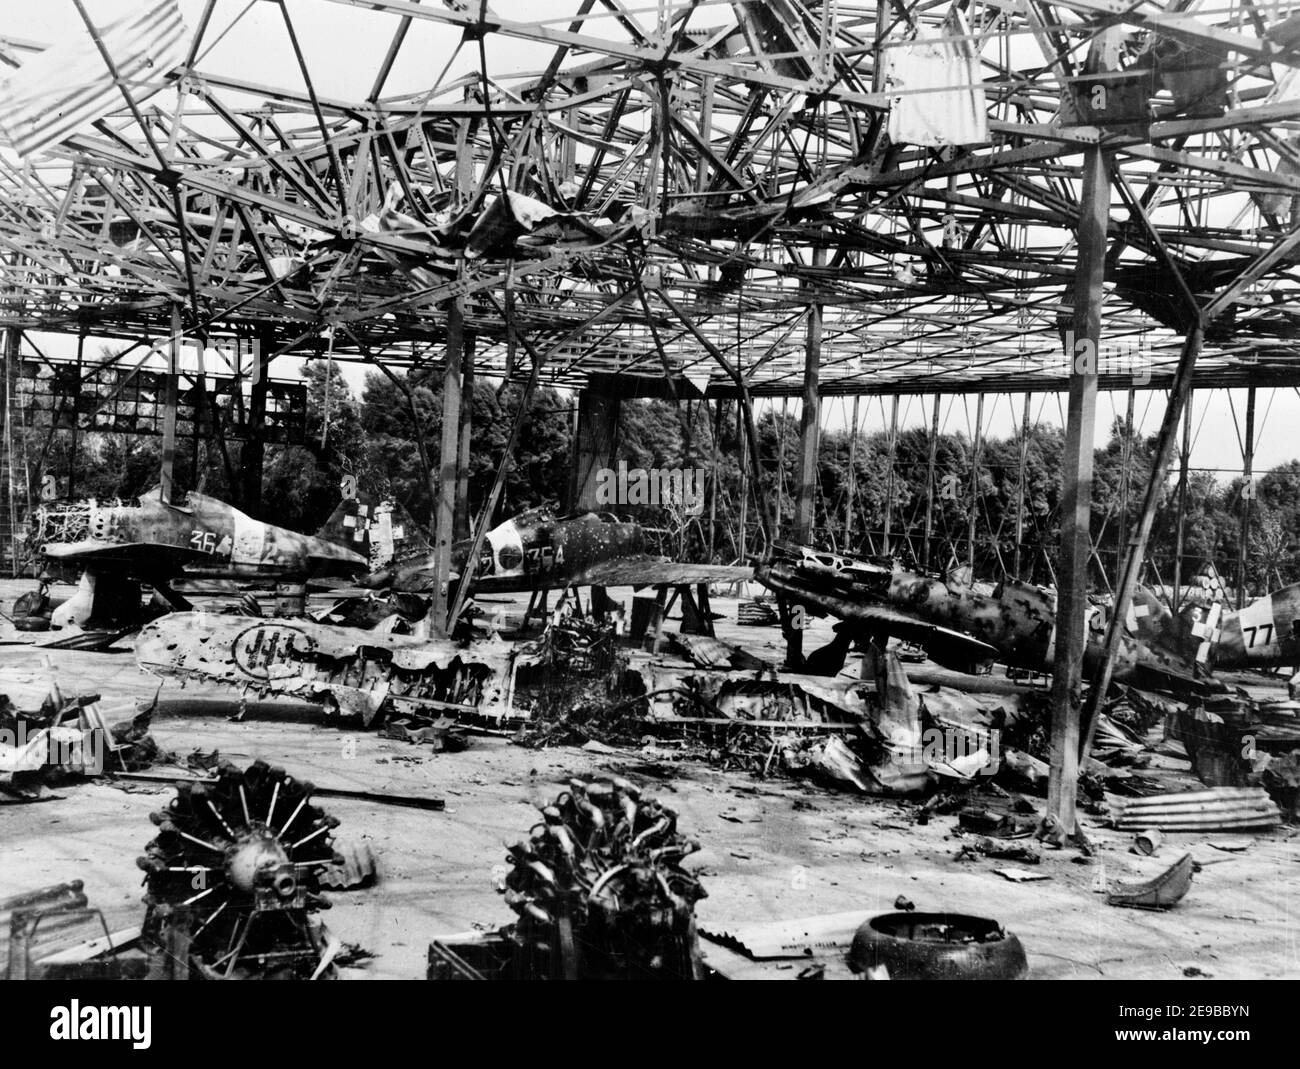 Wrecked Italian fighters in a destroyed hangar at Castel Benito airdrome, Tripolis, Libya, in early 1943. Visible are three Macchi MC.200 Saetta figthers and a single MC.202 Folgore (2nd plane from the right). Stock Photo